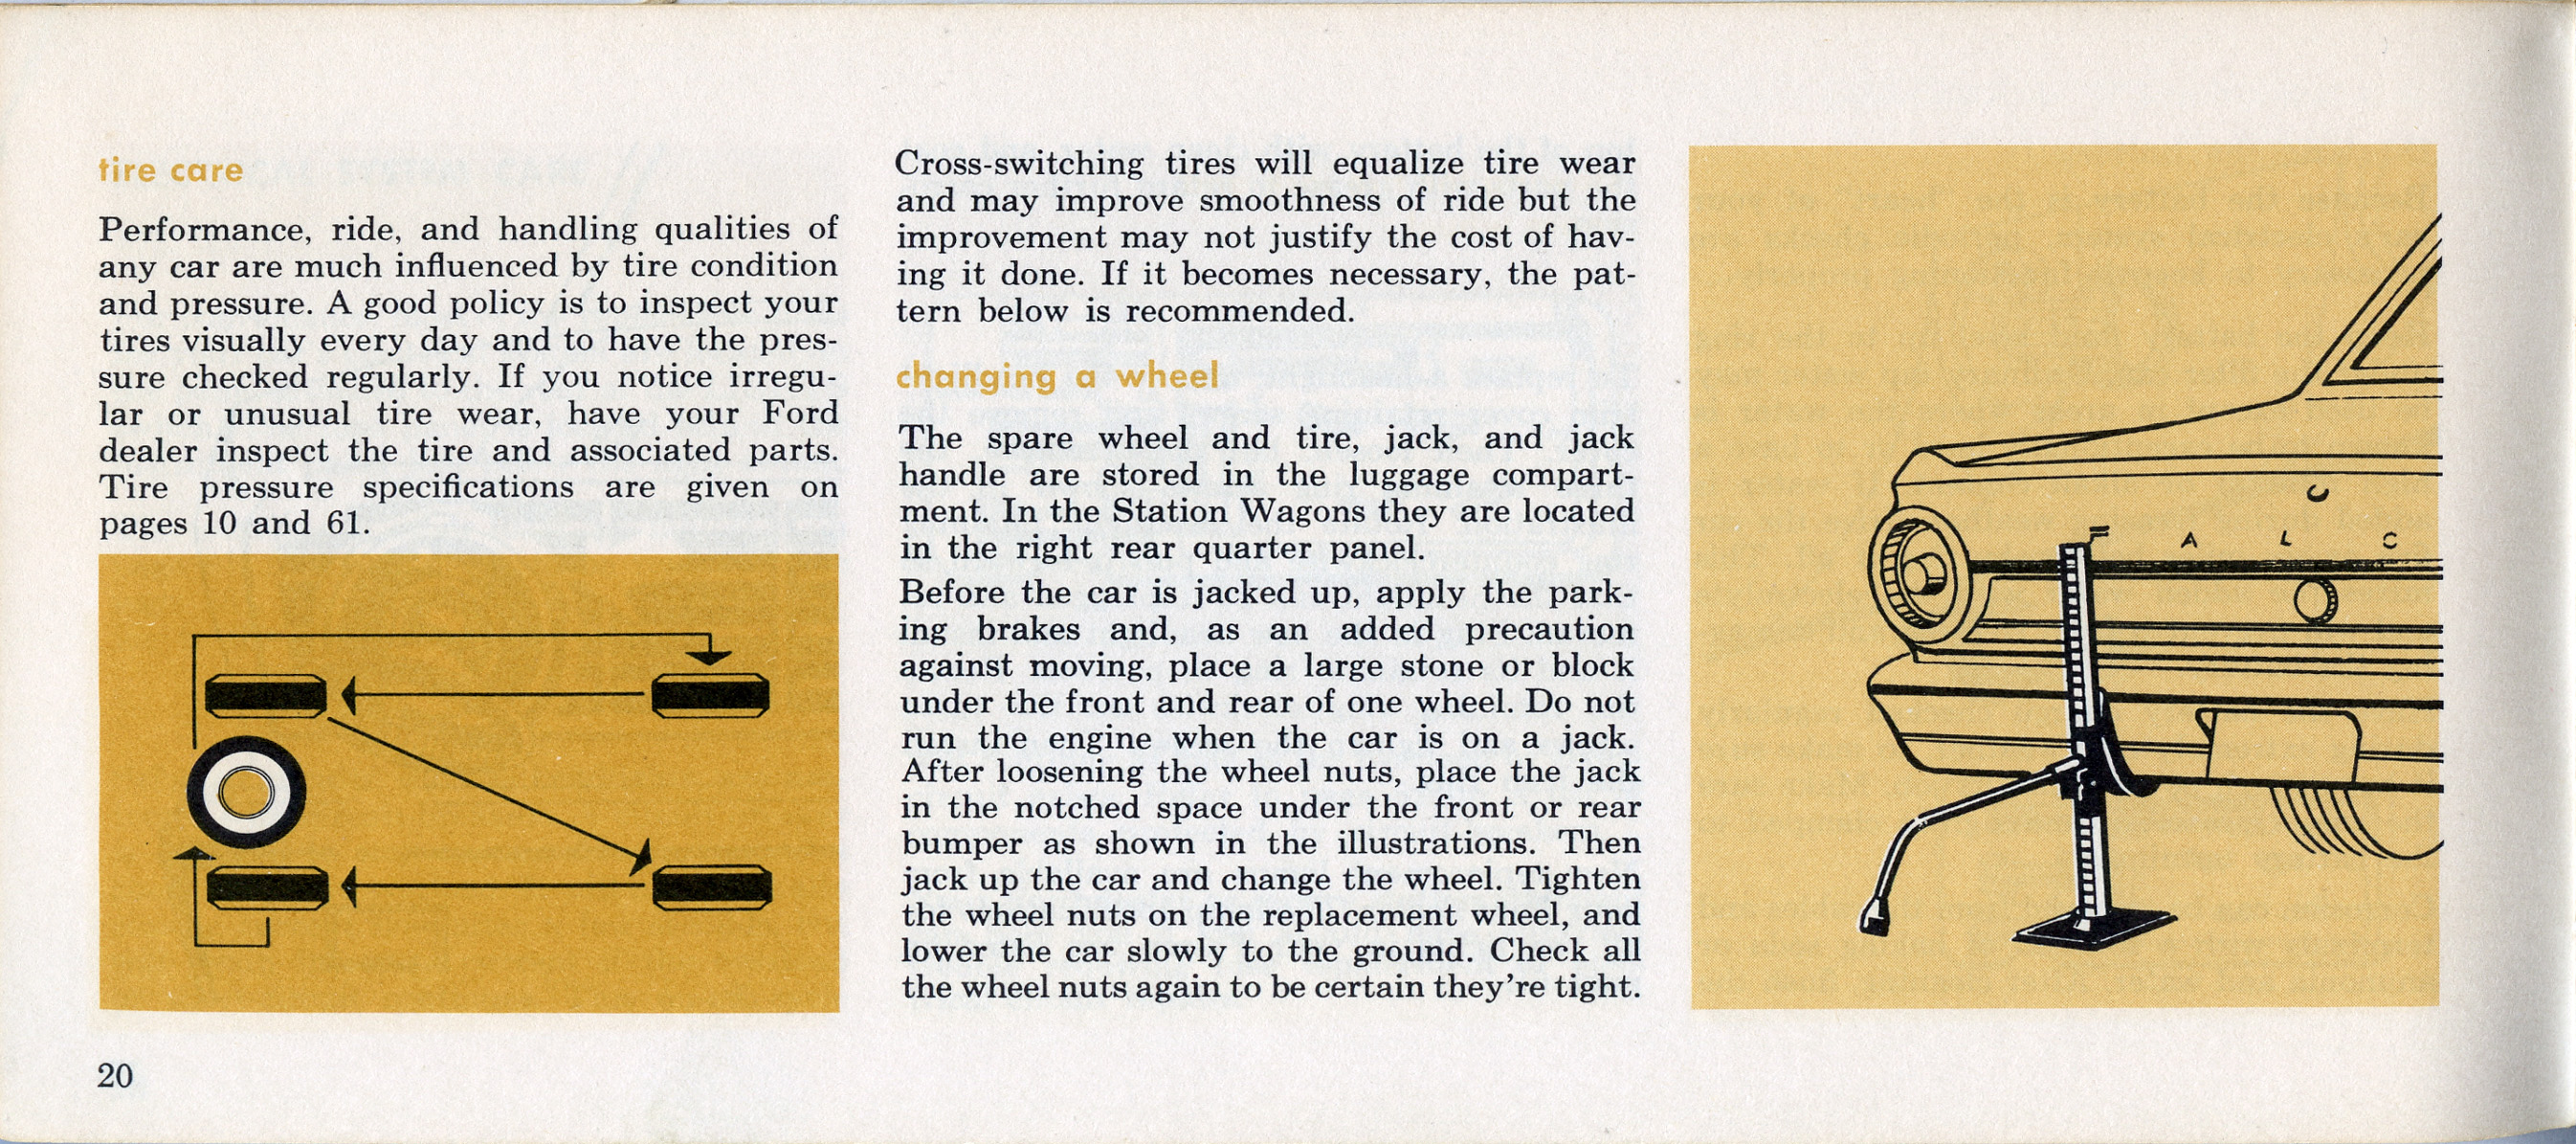 1964_Ford_Falcon_Owners_Manual-20